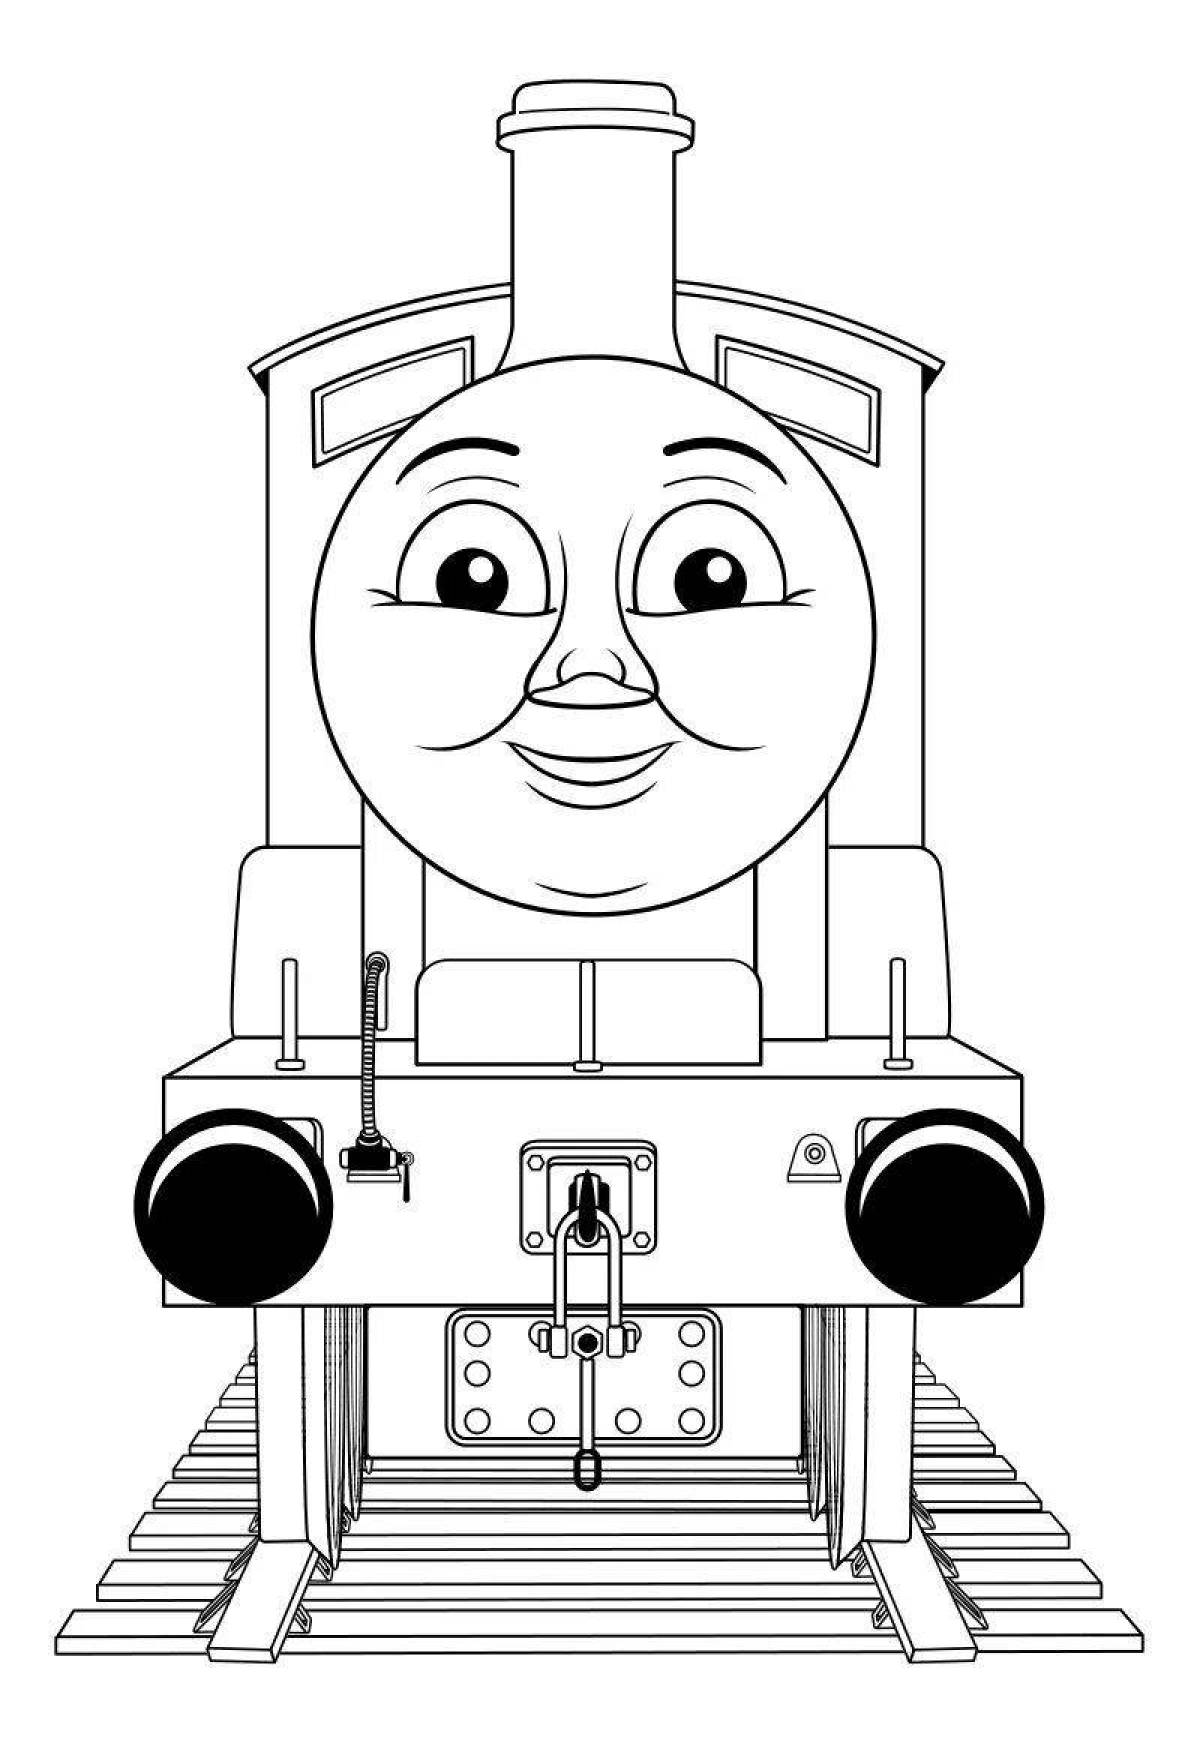 Awesome coloring book thomas the tank engine scary spider